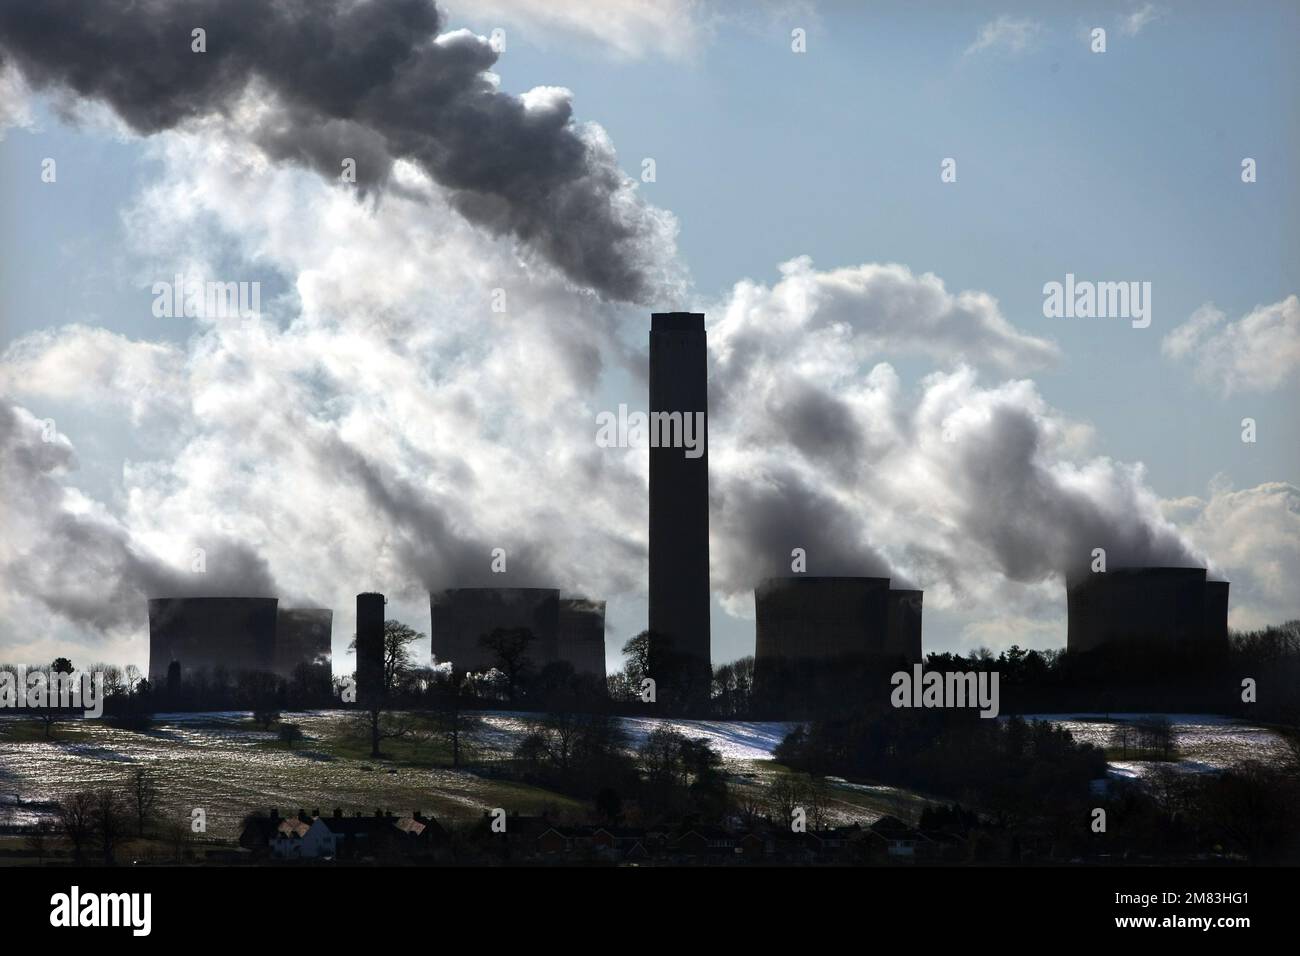 File photo photo dated 10/02/09 of smoke rising out of chimneys at Ratcliffe on Soar power station near Nottingham, as a study says requiring fossil fuel companies to pay to clean up their carbon emissions could help curb dangerous global warming at a relatively affordable cost. Stock Photo